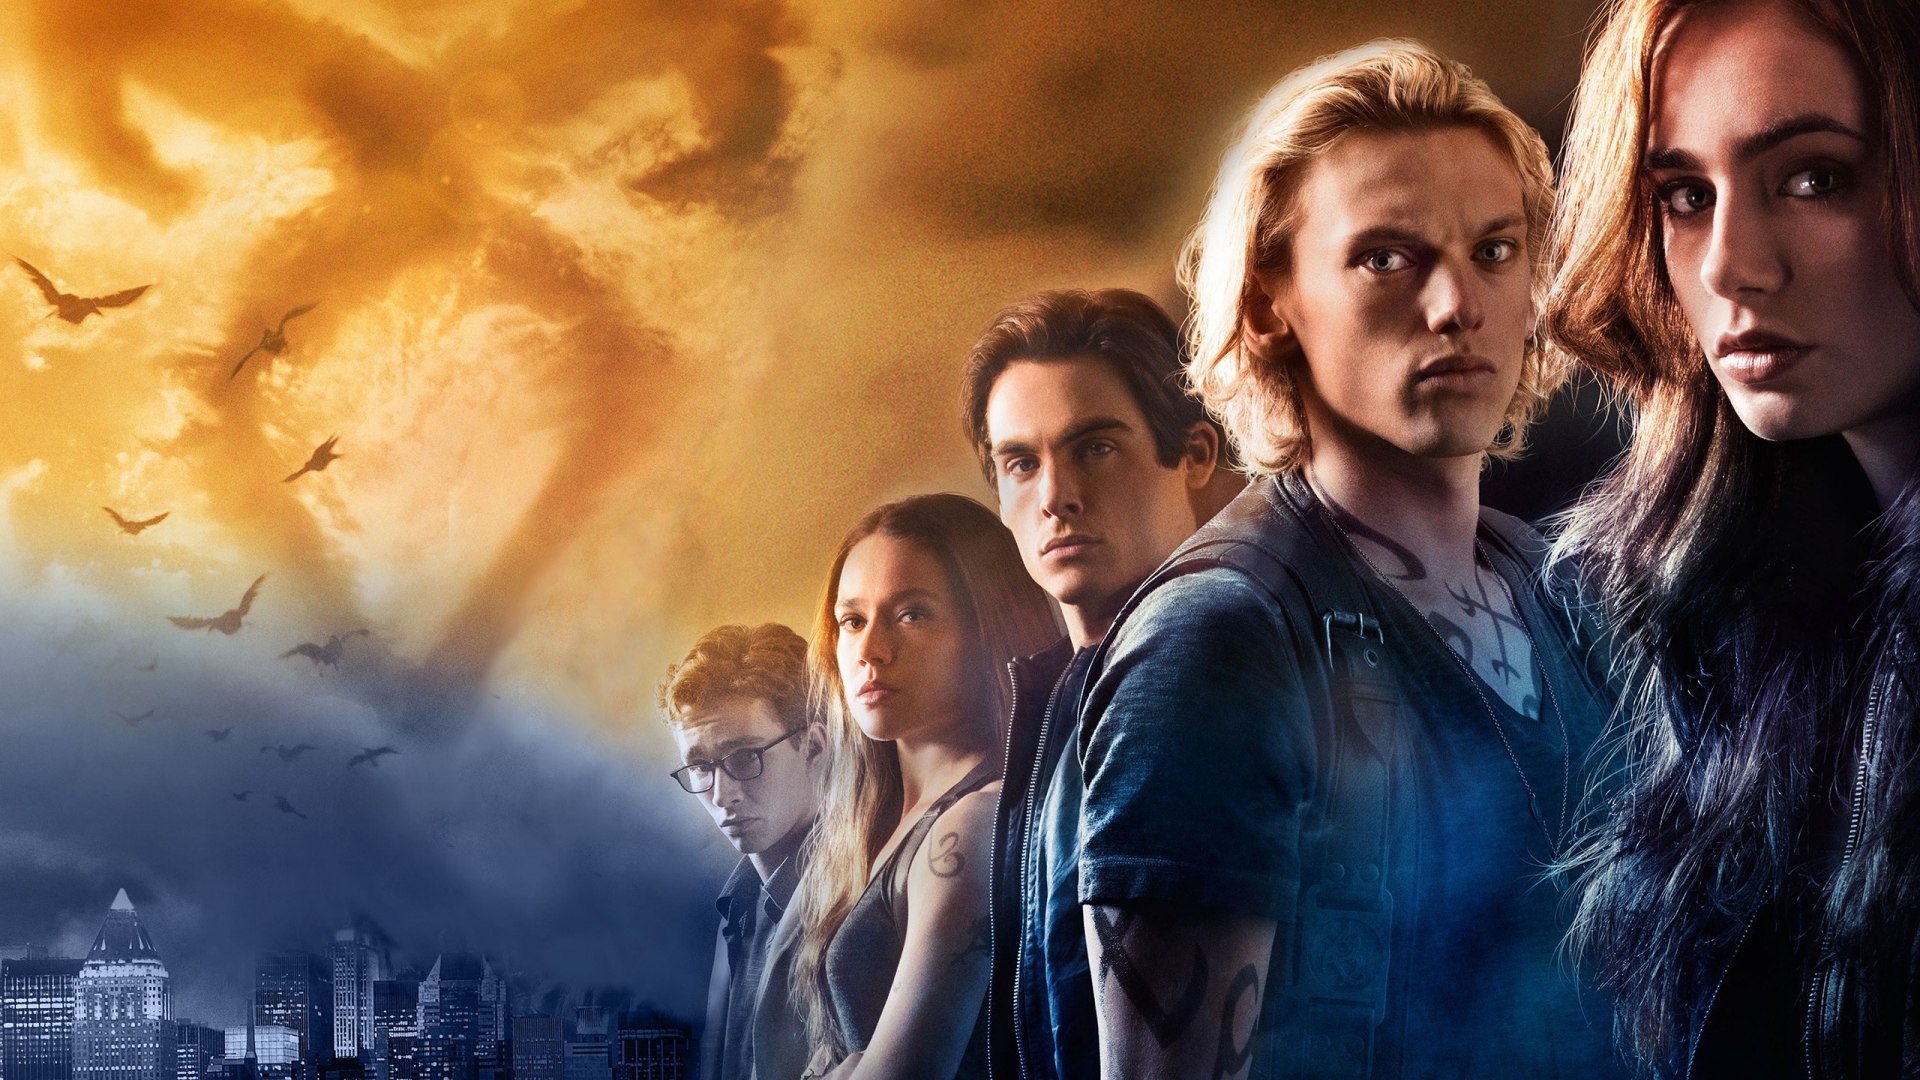 The Mortal Instruments City of Bones for 1920 x 1080 HDTV 1080p resolution